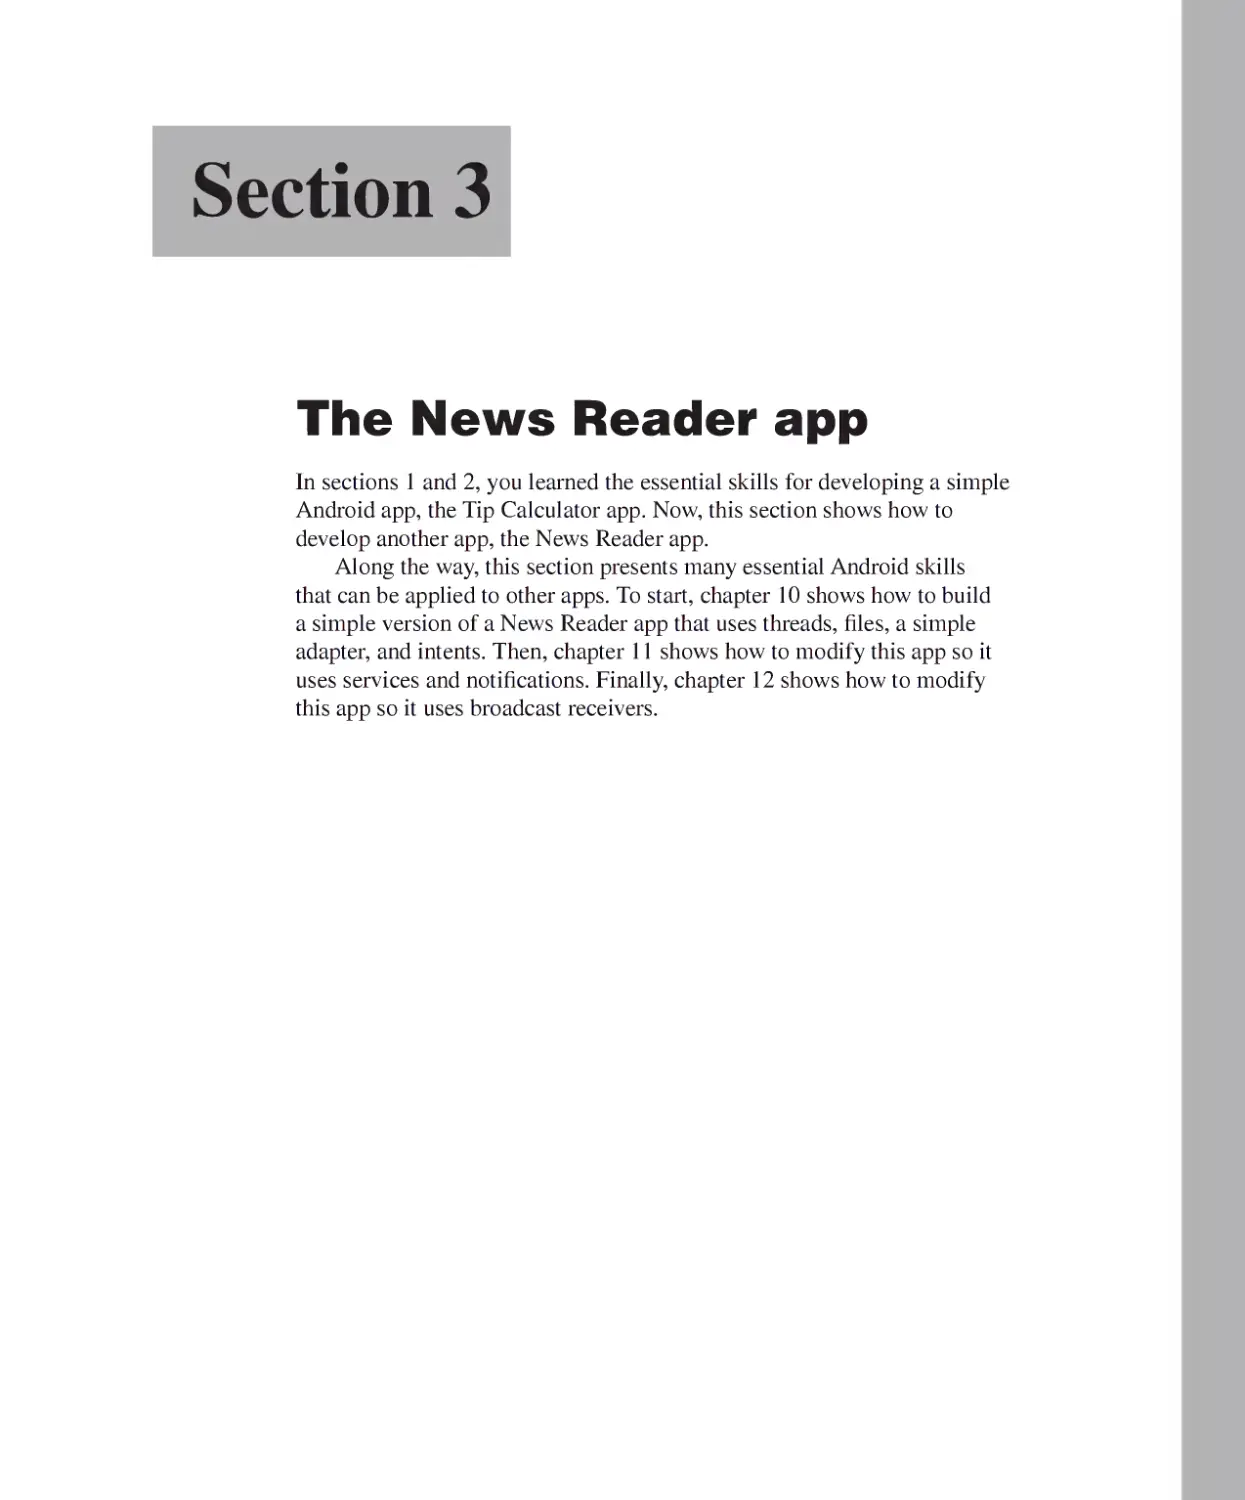 Section 3 - The News Reader App